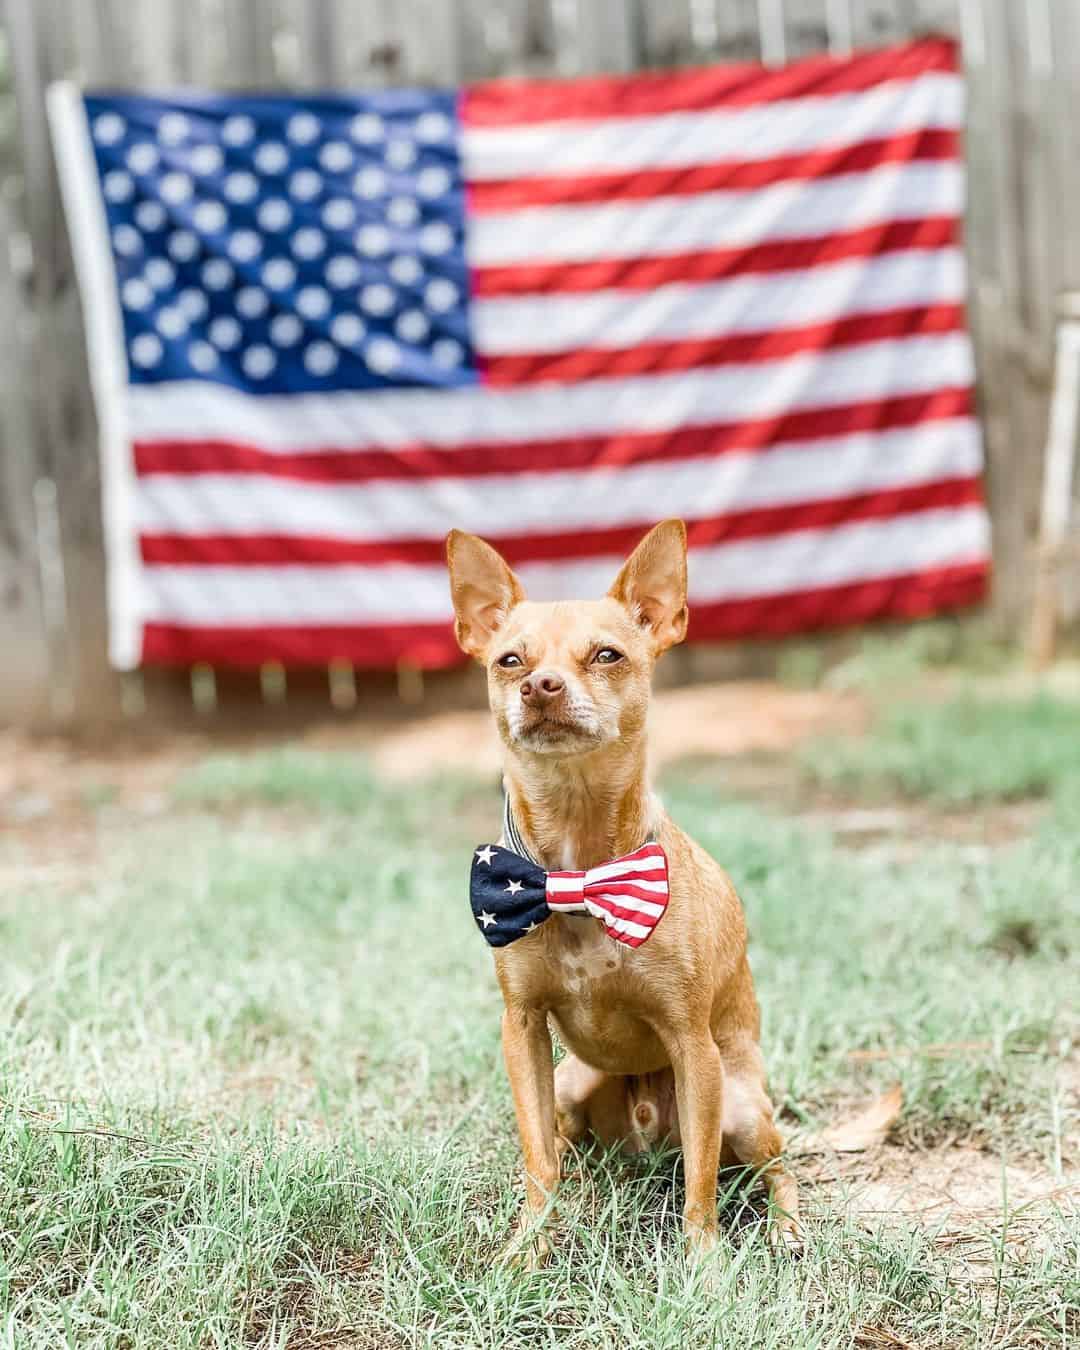 patriotic dog sitting on grass with flag in background